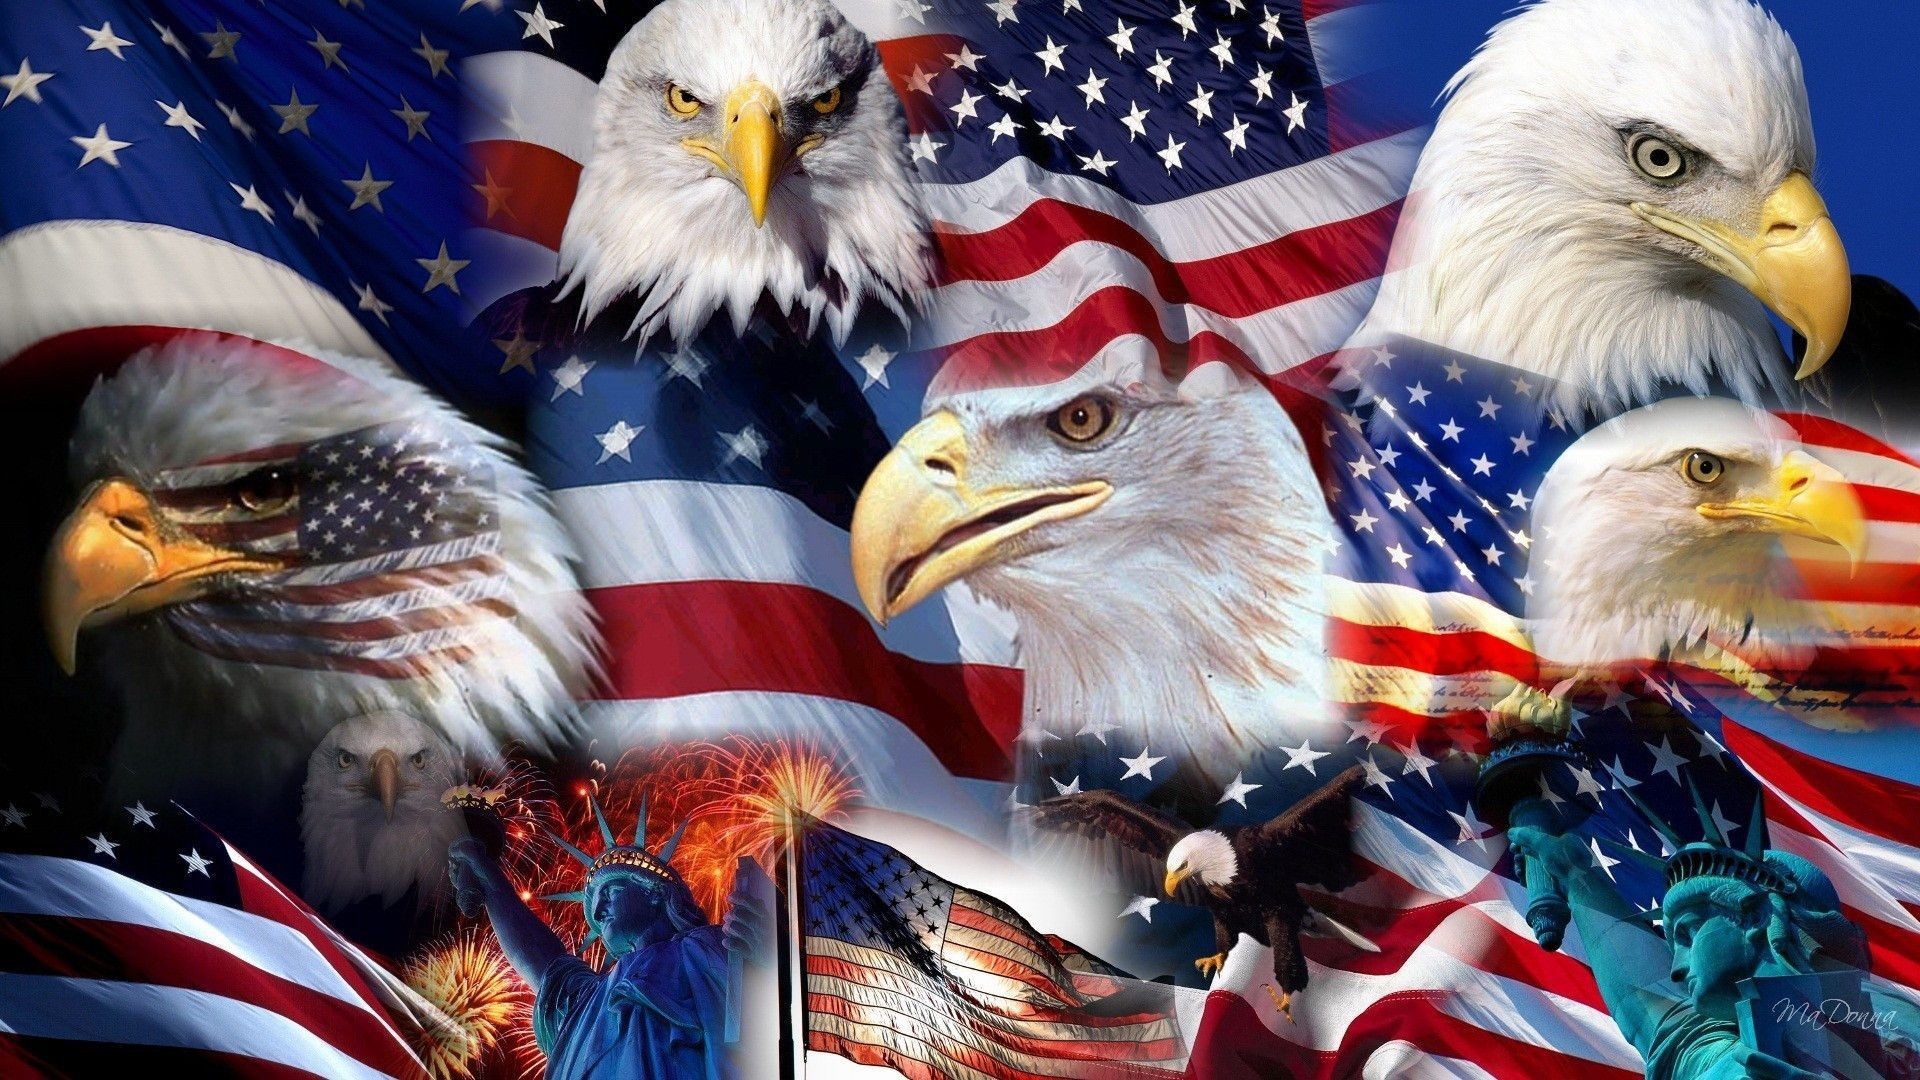 1920x1080 Search Results for “patriotic computer wallpaper free” – Adorable Wallpapers